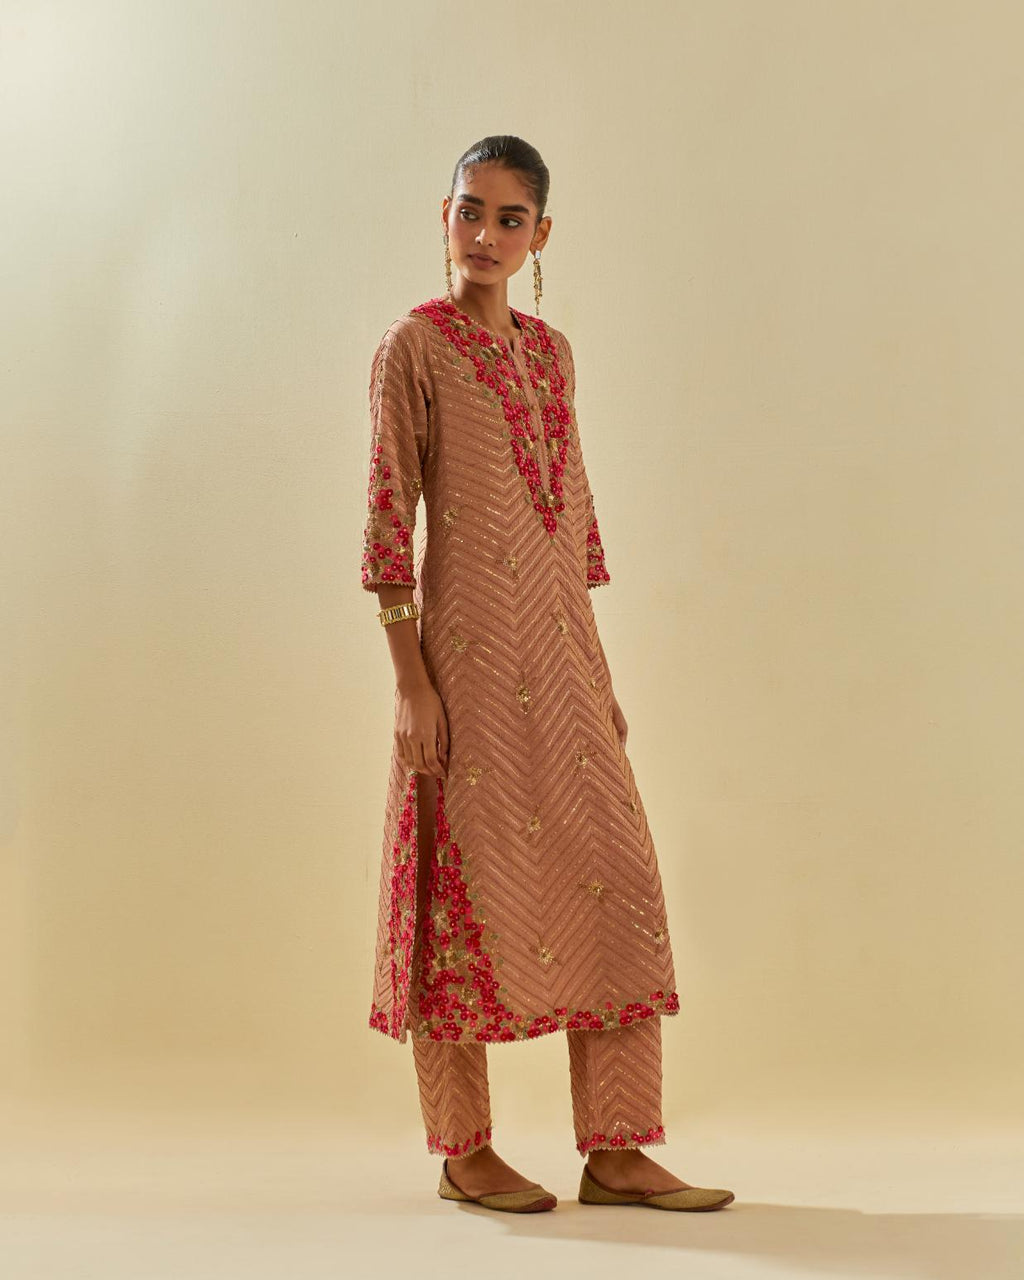 Pink tissue chanderi straight kurta set with delicate hand cut silk flower embroidery, highlighted with gold sequins and beads.